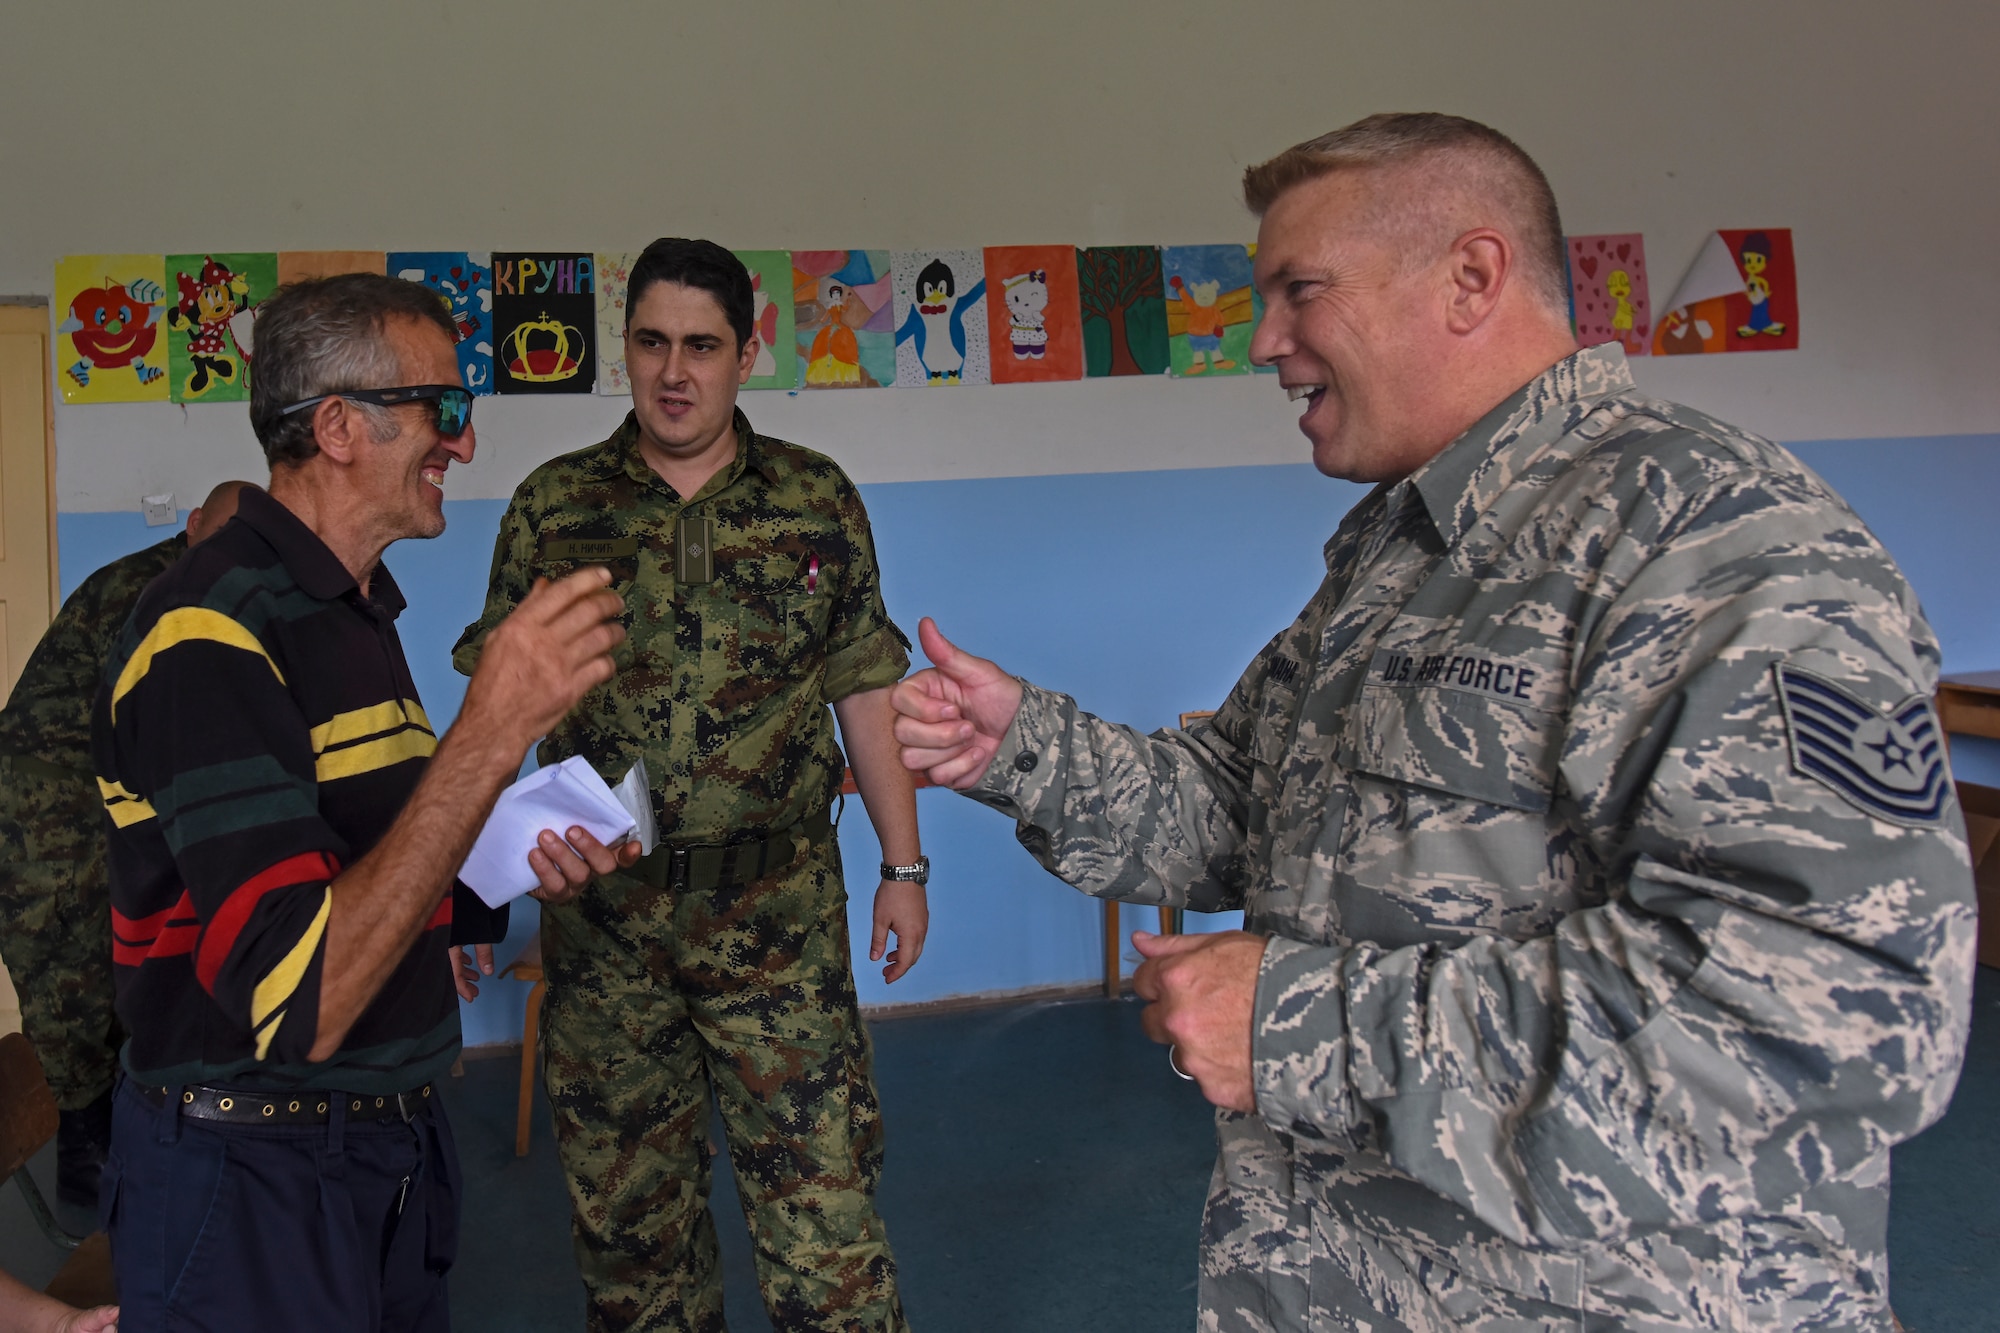 Service members from the Ohio Army National Guard Medical Detachment and the Ohio Air National Guard Medical Group participated with members of the Serbian Armed Forces in a Combined Medical Engagement from Sept. 4, 2016 to Sept. 17, 2016 in various locations throughout southeast Serbia. The purpose of the engagement was to provide humanitarian assistance by the combined medical teams to the Serbian civilians in the regions, build a working relationship between the Serbian Armed Forces’ and Ohio National Guard's medical teams and lay the groundwork for a future relationship with the Angolan Armed Forces. (U.S. Air National Guard photo by Senior Airman Wendy Kuhn/Released)